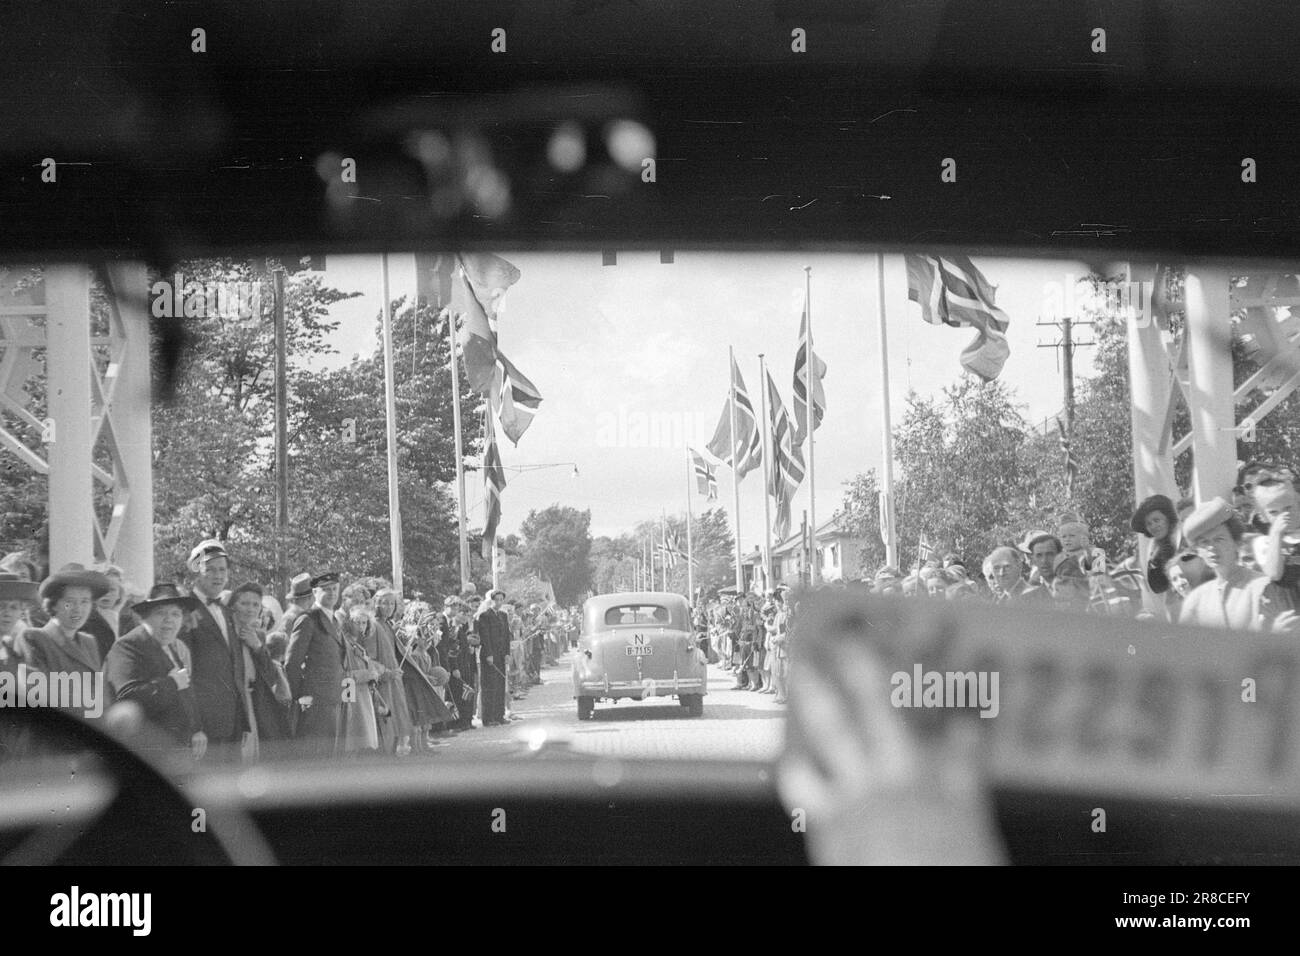 Current 14-3-1947: The King numberOut among people King Haakon 7th greets the people on the occasion of his 75th birthday.  The royal car drives into Moss, which had raised all the Norwegian flags in the city for the occasion. Thousands of people turned up to witness the rare event.  Photo: Th. Skotaam / Aktuell / NTB ***PHOTO NOT IMAGE PROCESSED*** Stock Photo